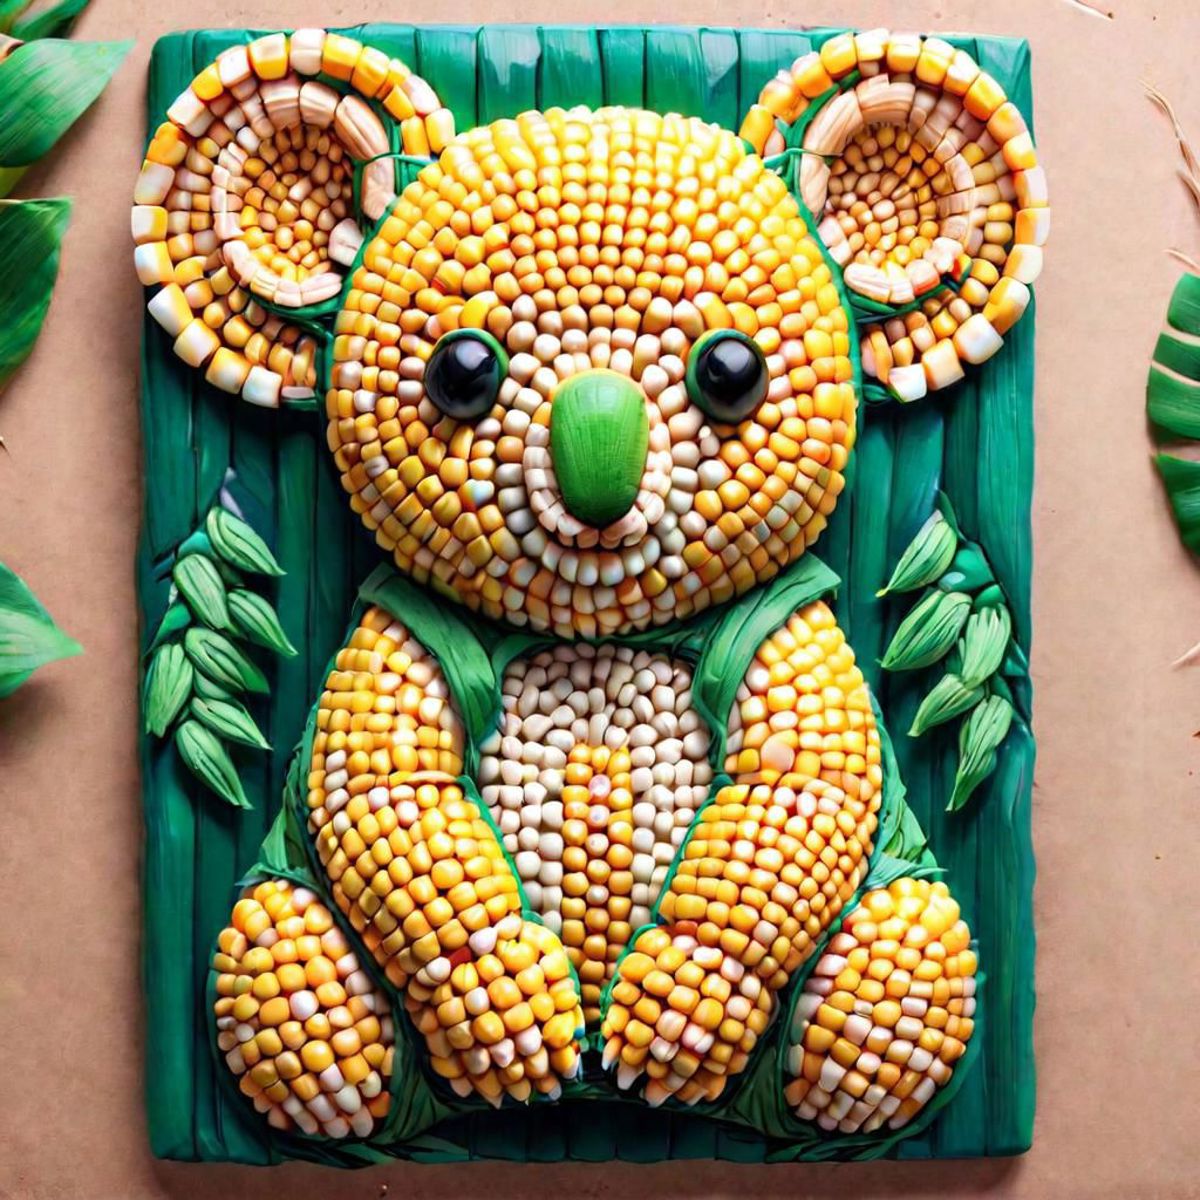 Cute Bear Cake Made from Corn and Green Leaves